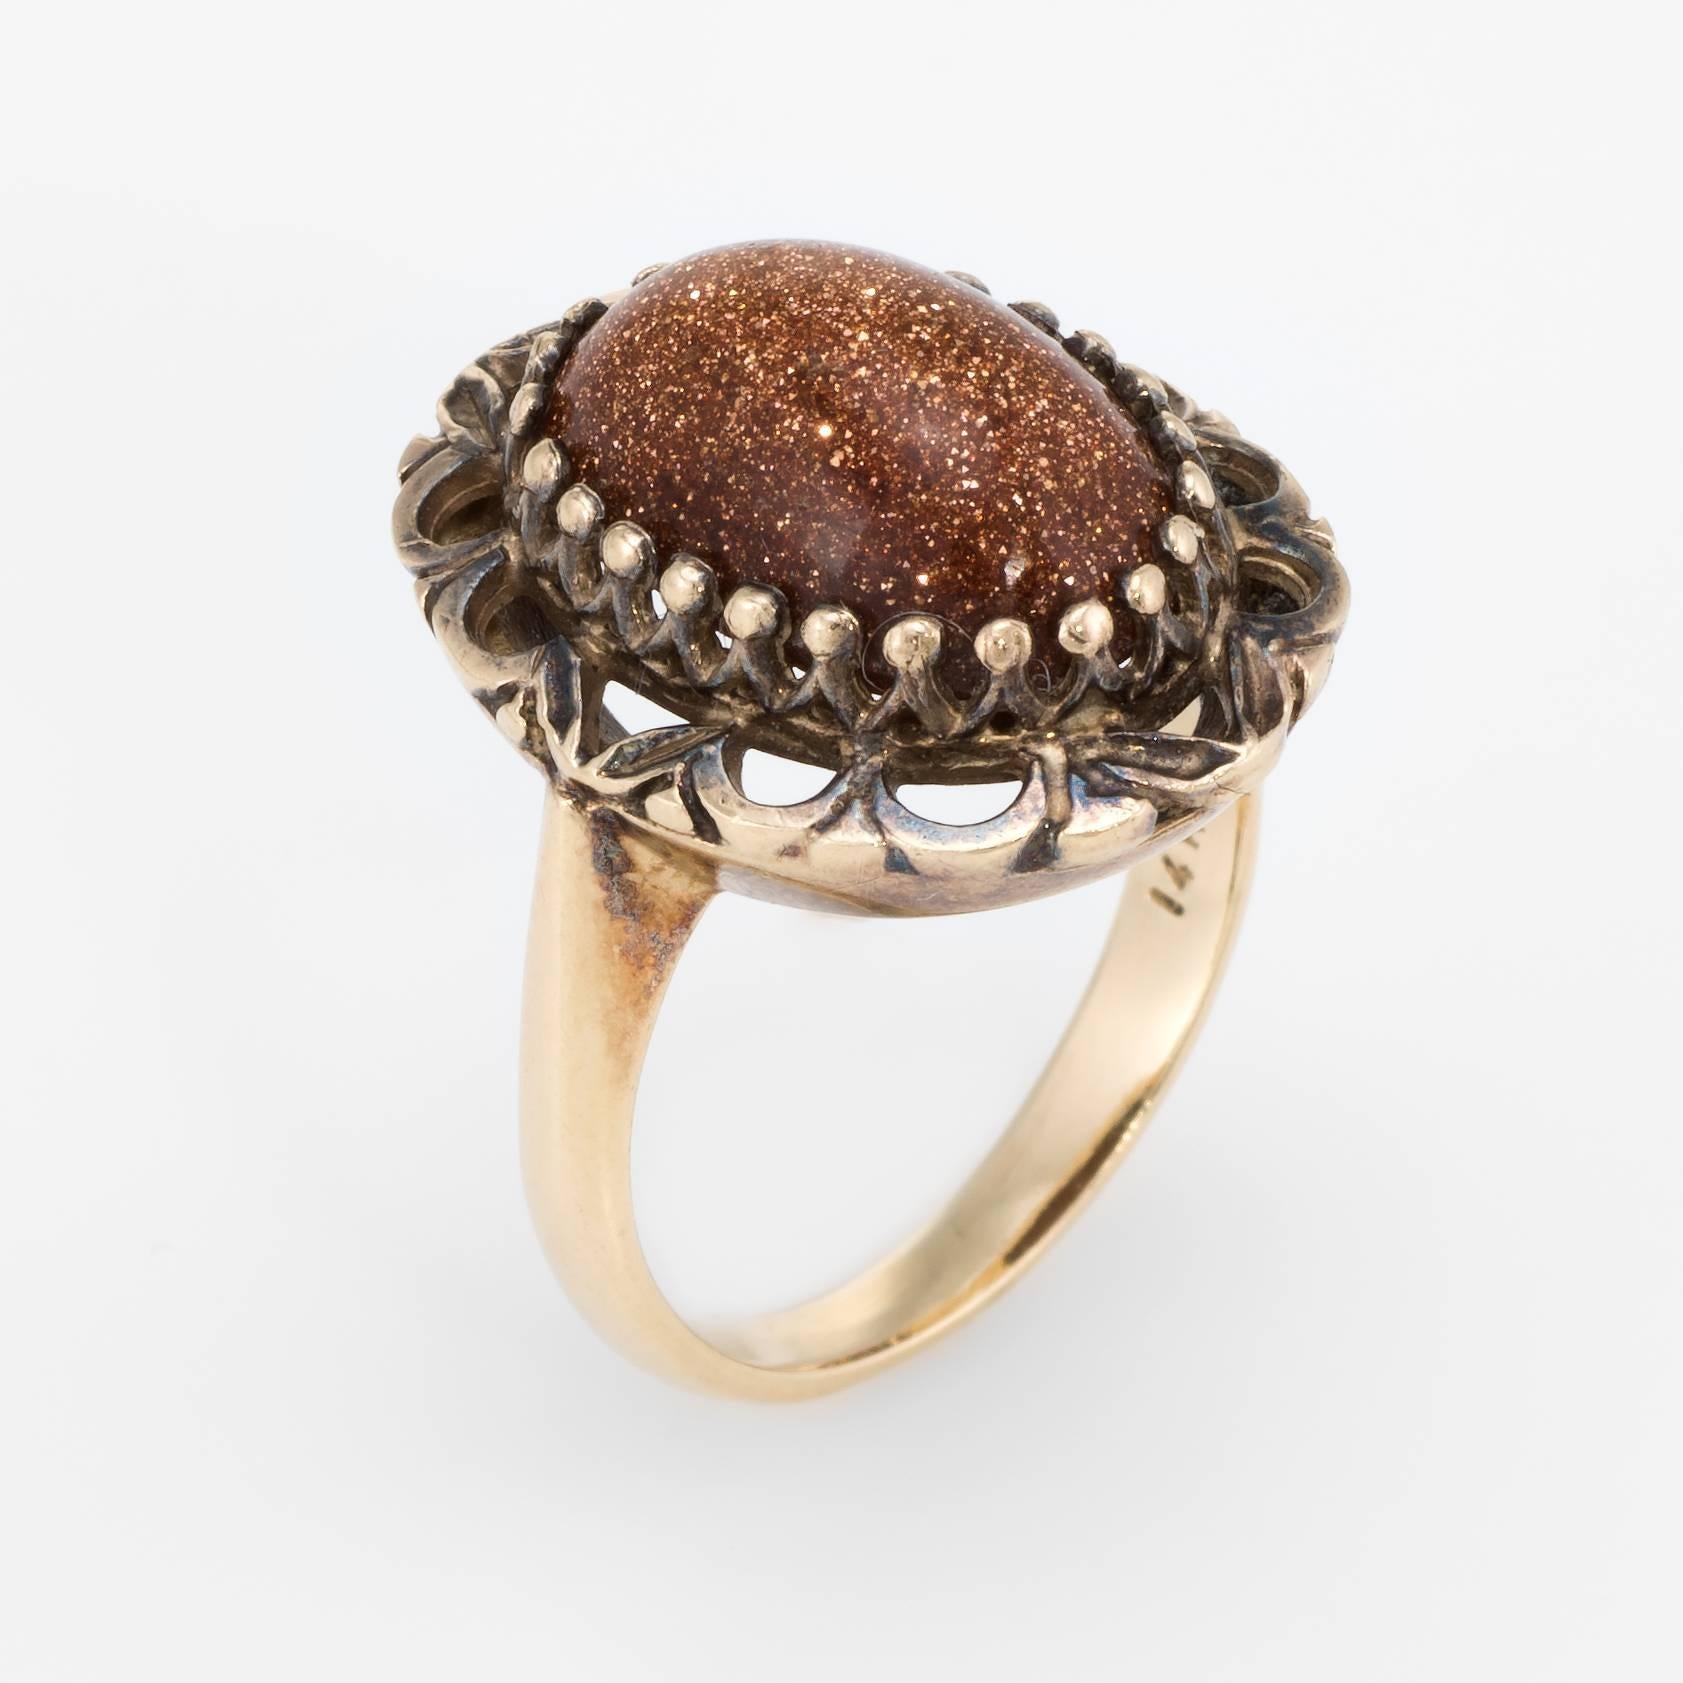 Finely detailed vintage cocktail ring (circa 1960s), crafted in 14 karat yellow gold. 

Cabochon cut goldstone measures 13mm x 9mm. The stone is in excellent condition and free of cracks or chips. The goldstone exhibits a glitter in shades of brown